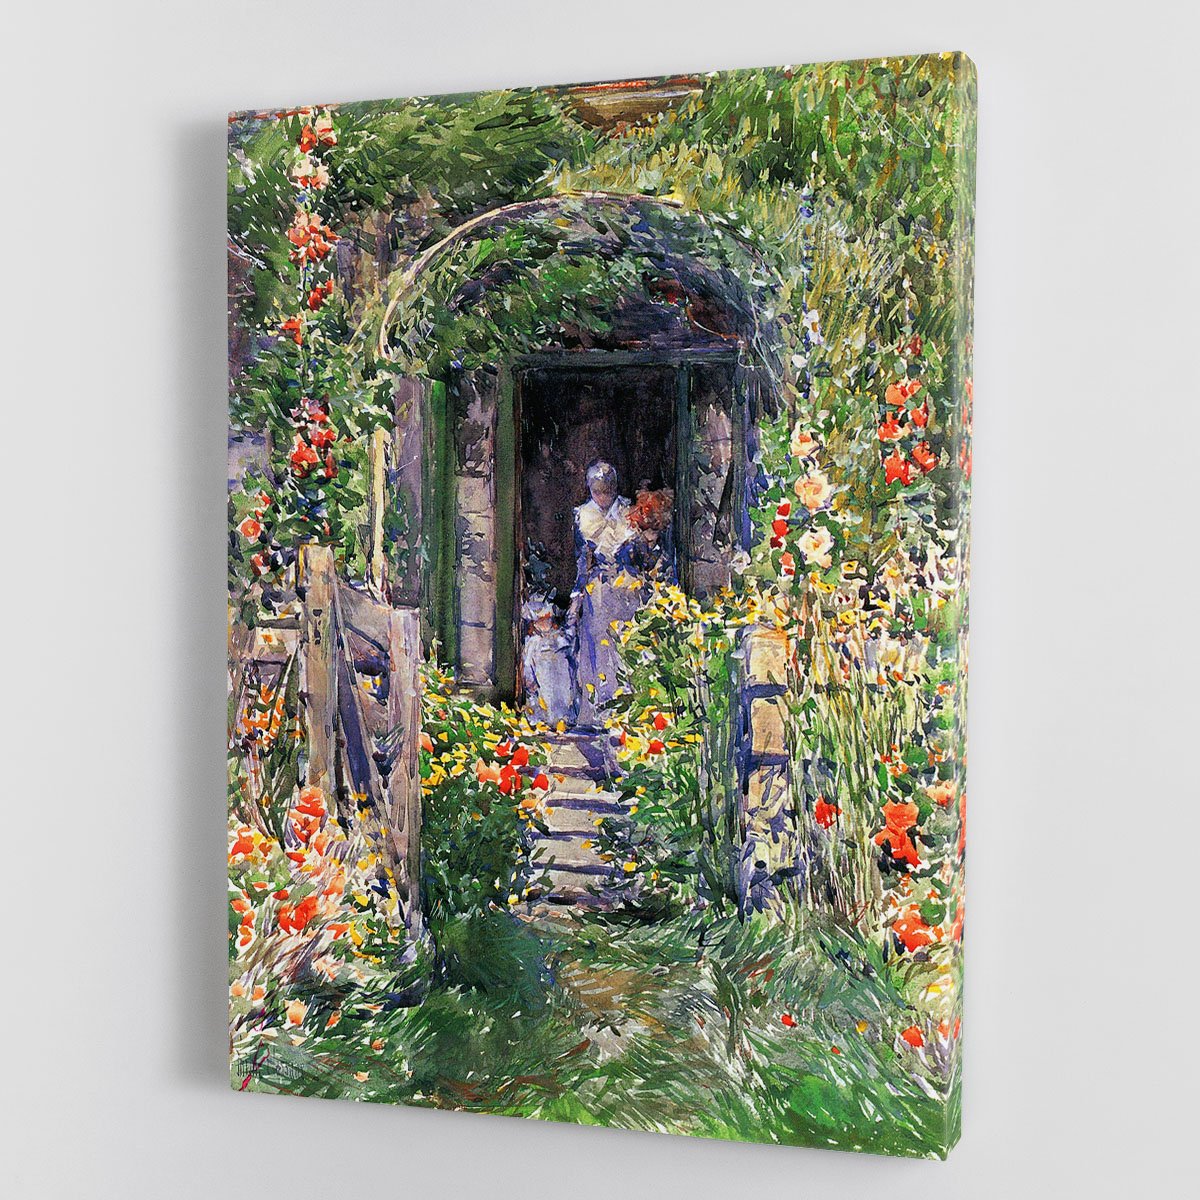 Isles of Shoals Garden by Hassam Canvas Print or Poster